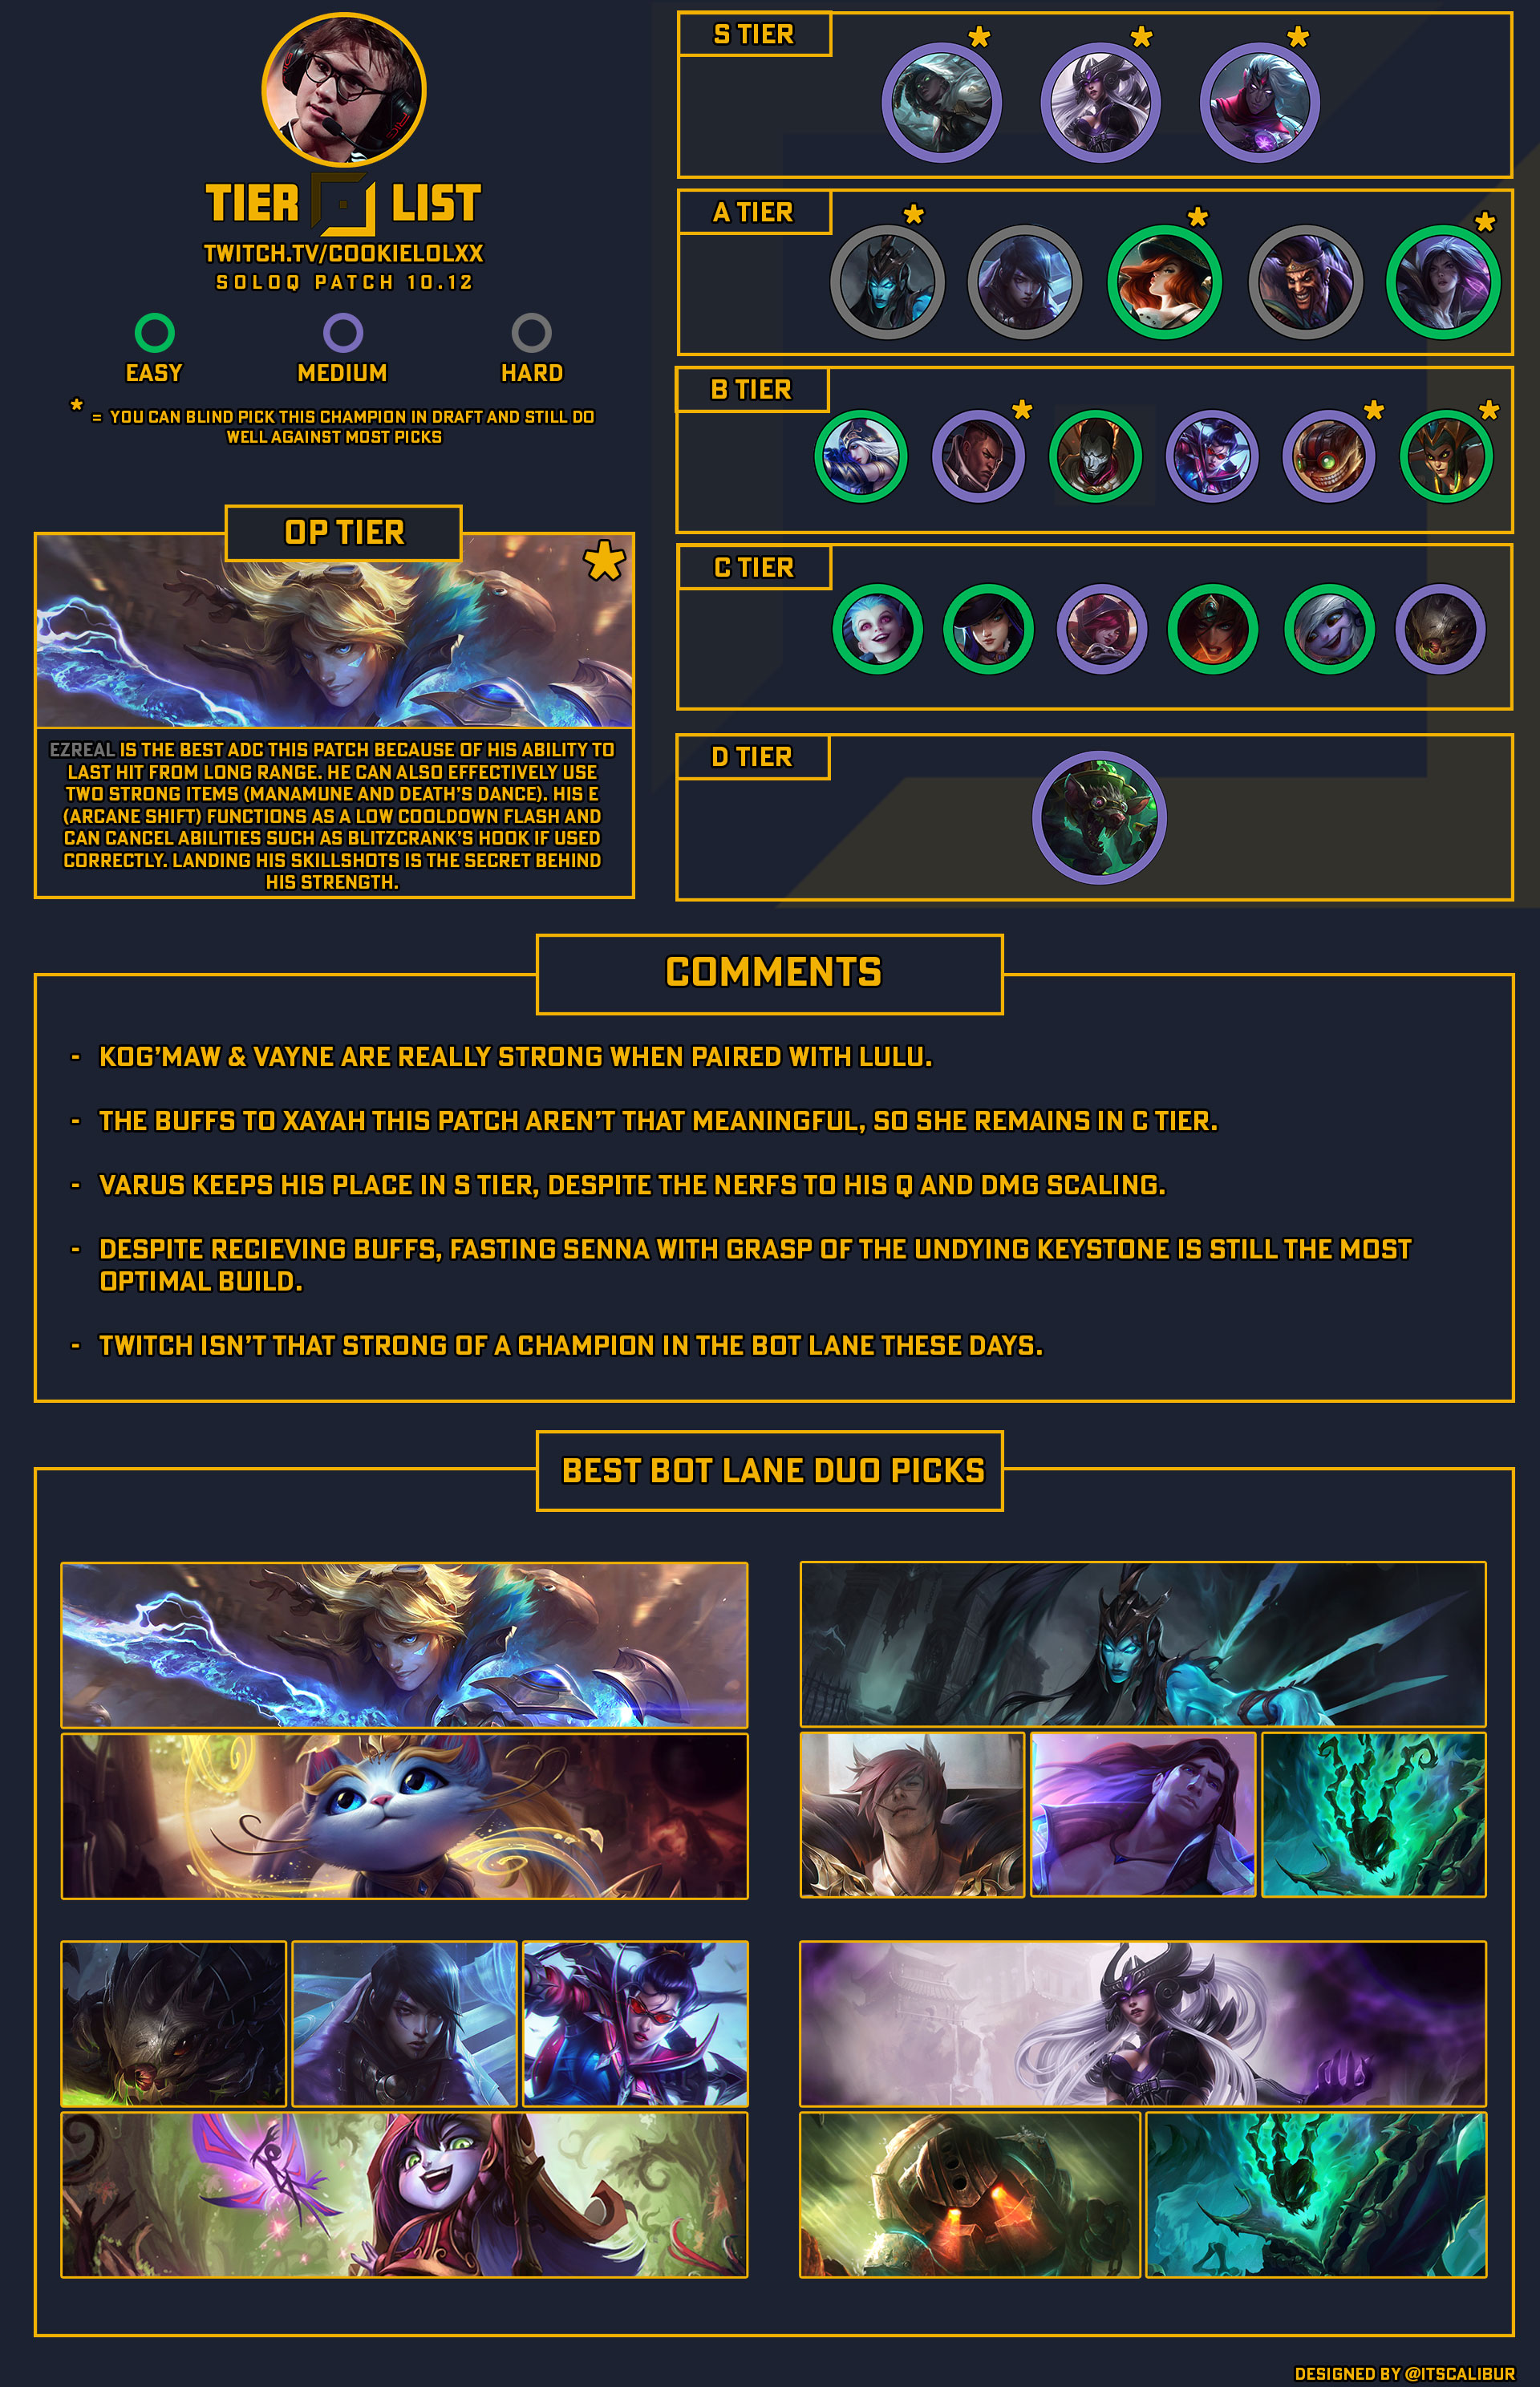 korroderer mudder os selv CookieLoLxx on Twitter: "Patch 10.12 ADC Tierlist/Infographic! I'll be  answering any questions you may have in the replies here :)  https://t.co/jayM5C5aav" / Twitter